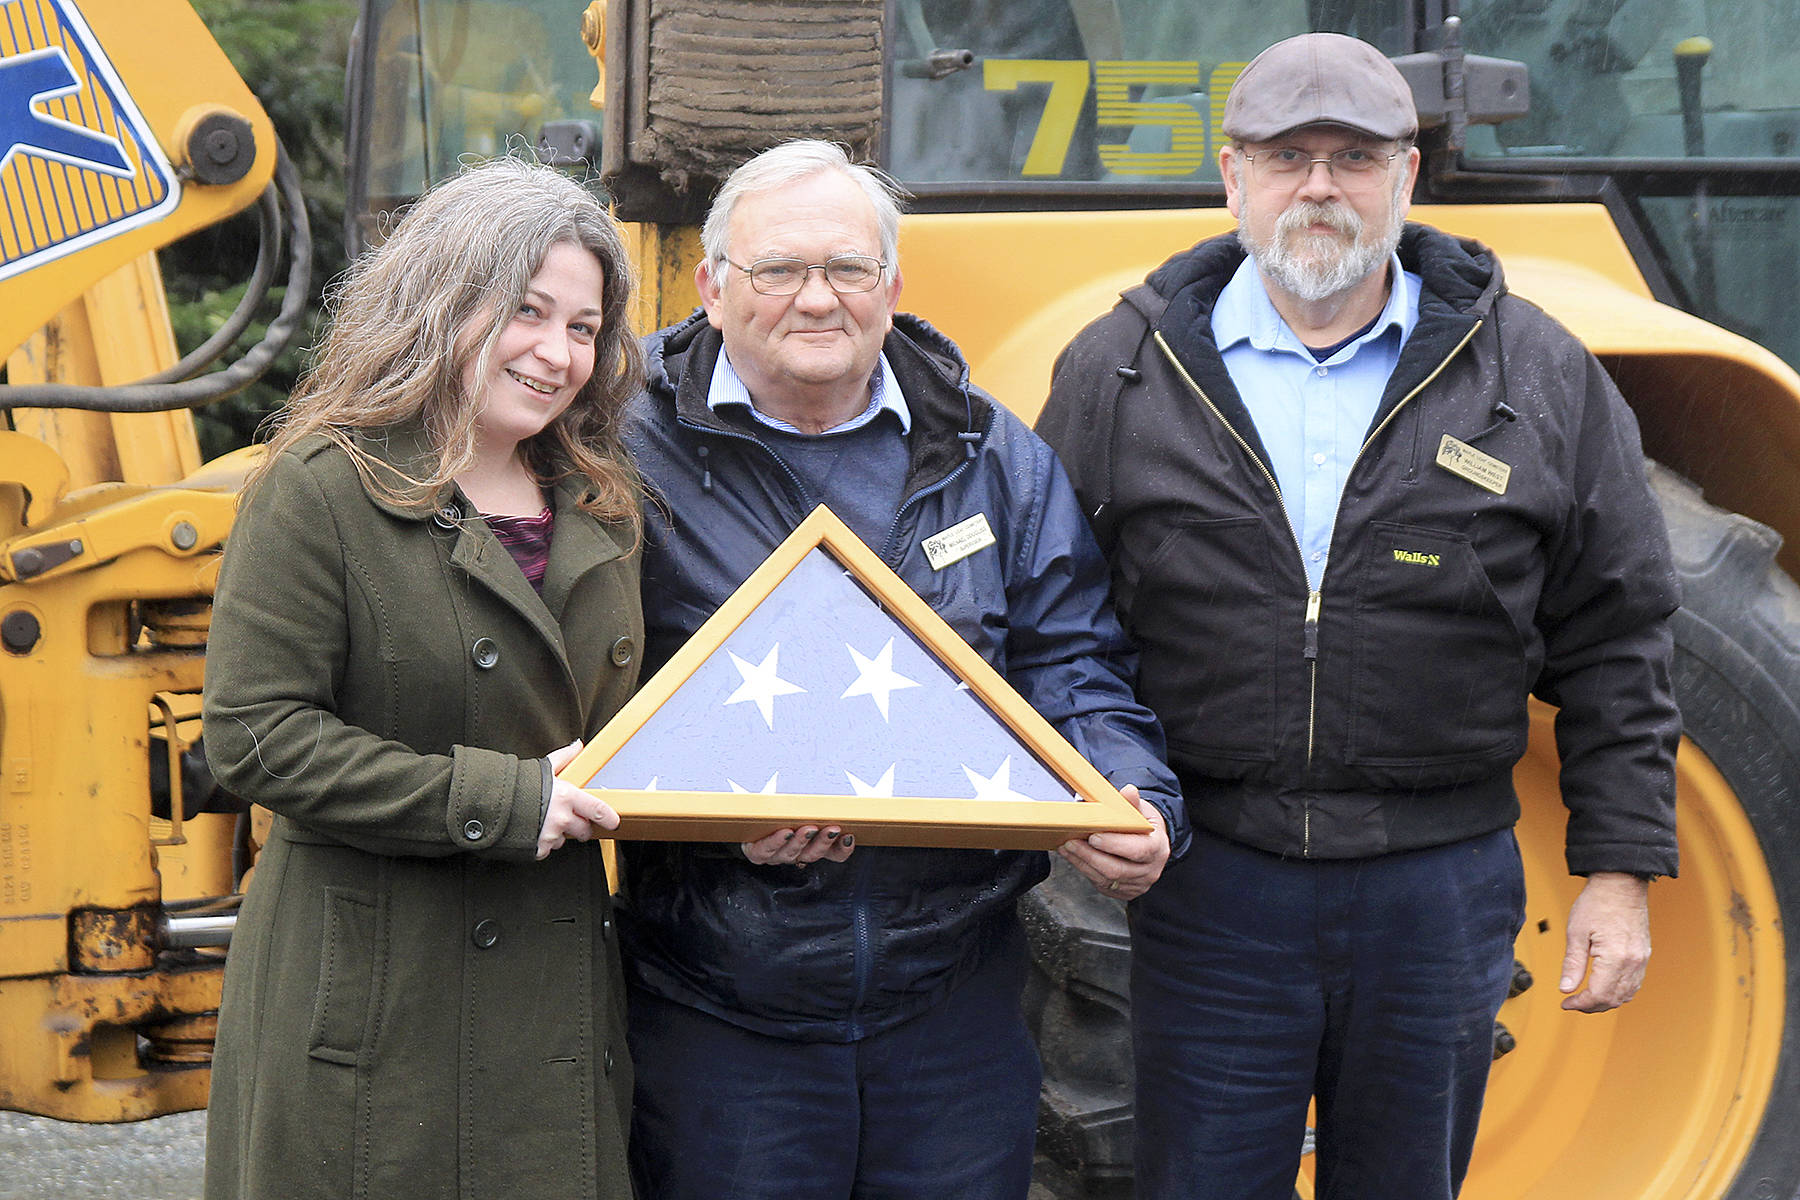 Memorial Day event organizer Kelly Davidson, Maple Leaf Cemetery Caretaker Mike Dougliss and Groundskeeper William West hold a flag that will be presented at this year’s event.